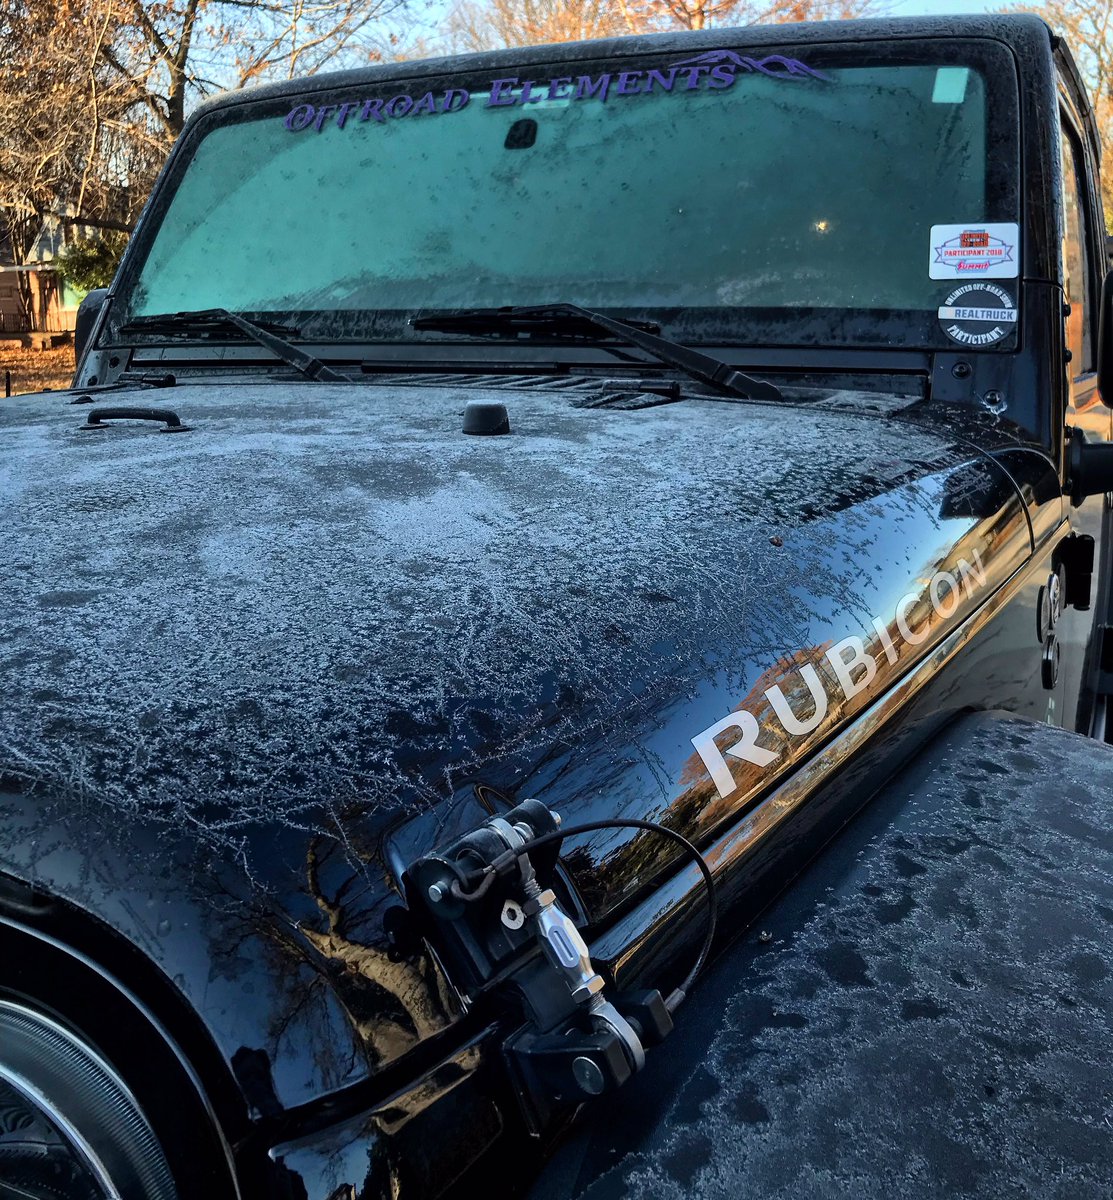 #Winter has arrived and thus #FrostyFriday has too 😂 #okwx #Jeeplife #TeamOffroadElements #jeep